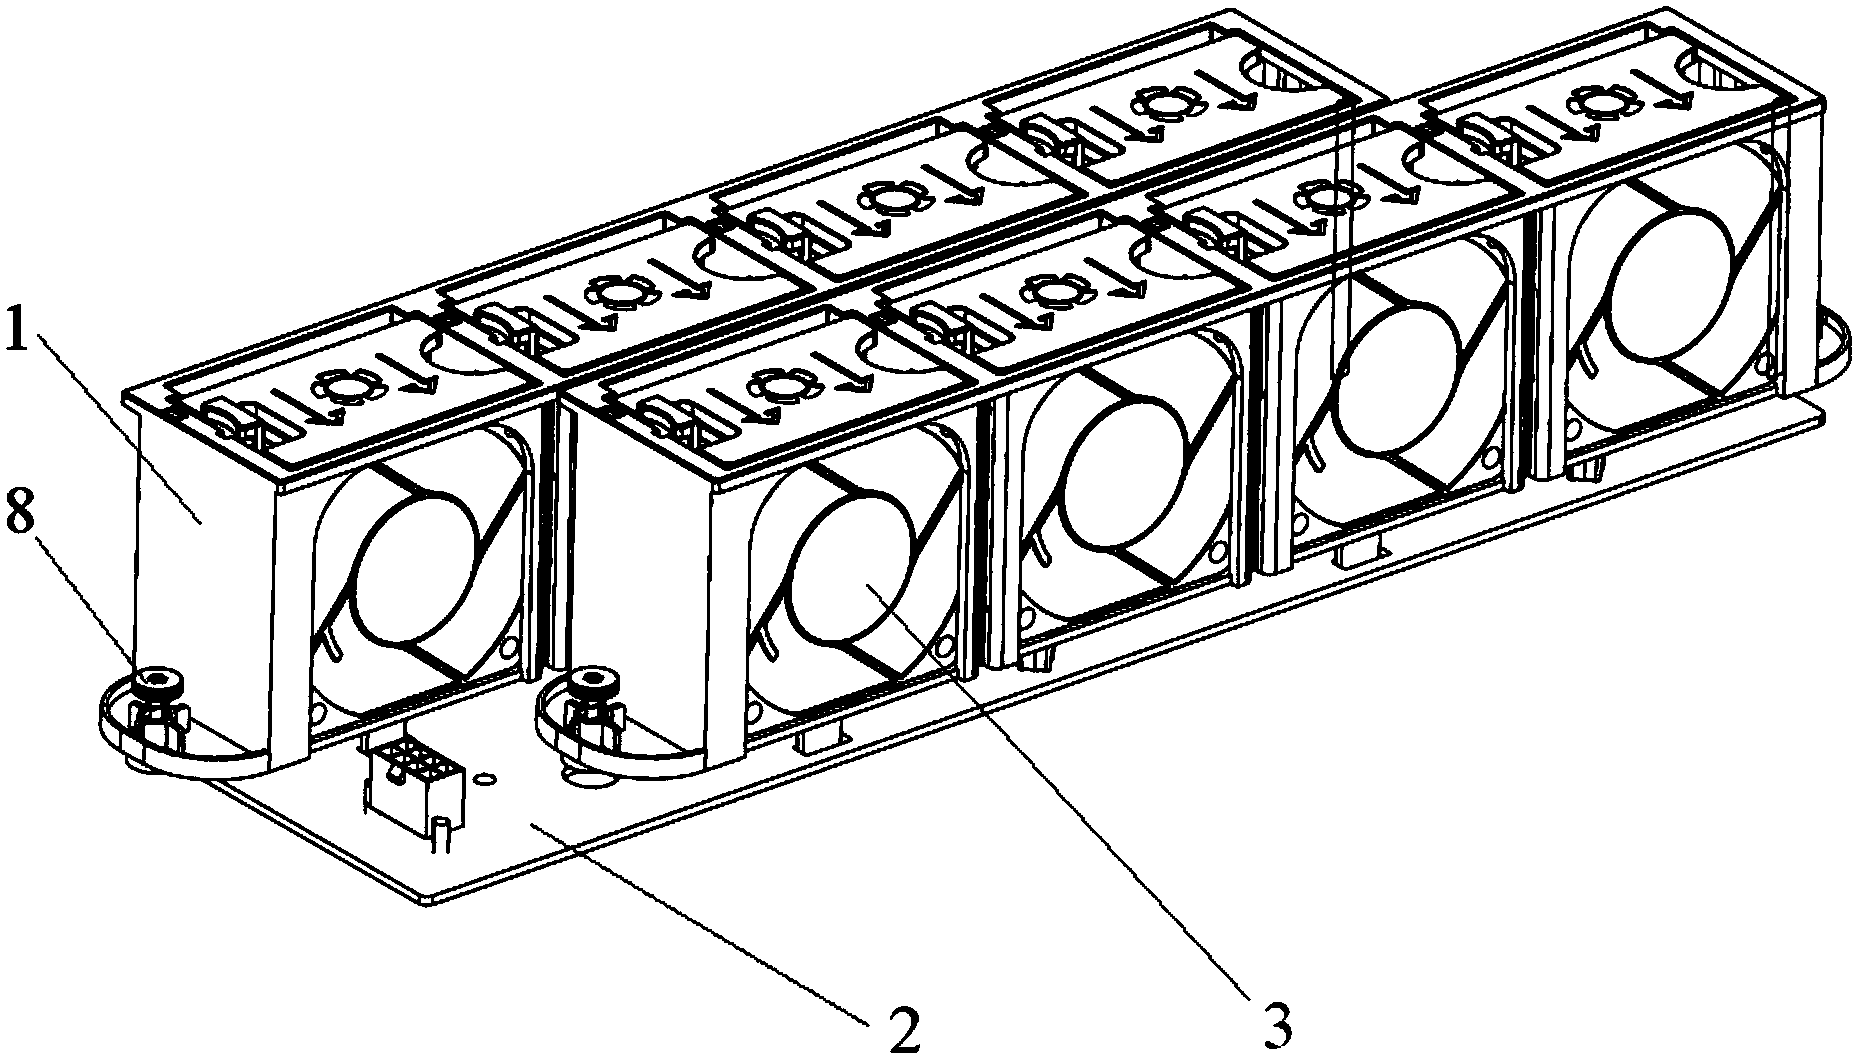 Fan module used for server and server